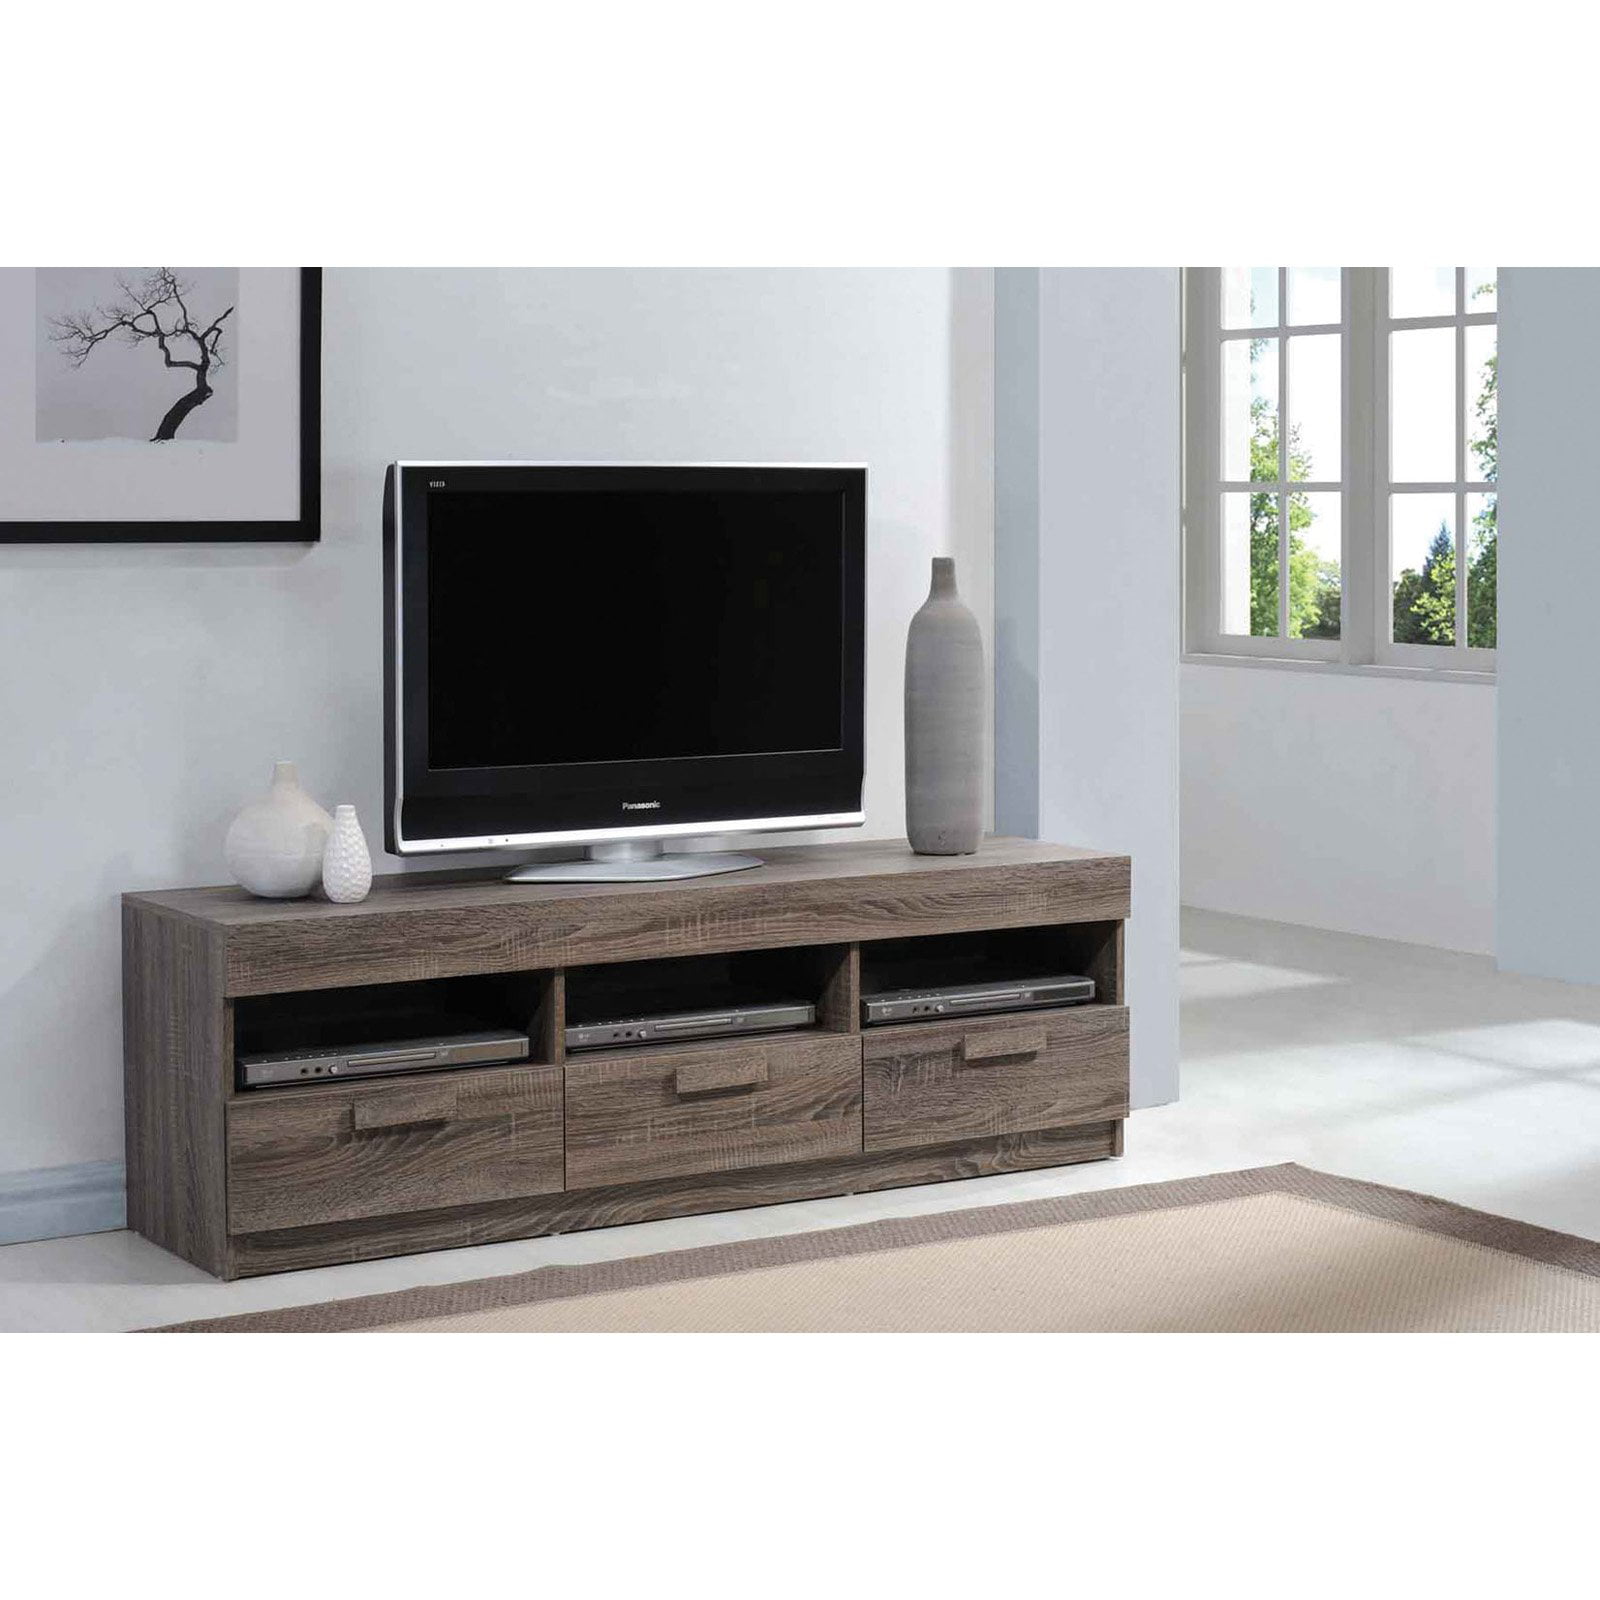 Acme Alvin Rustic Oak Tv Stand For Flat Screen Tvs Up To 60